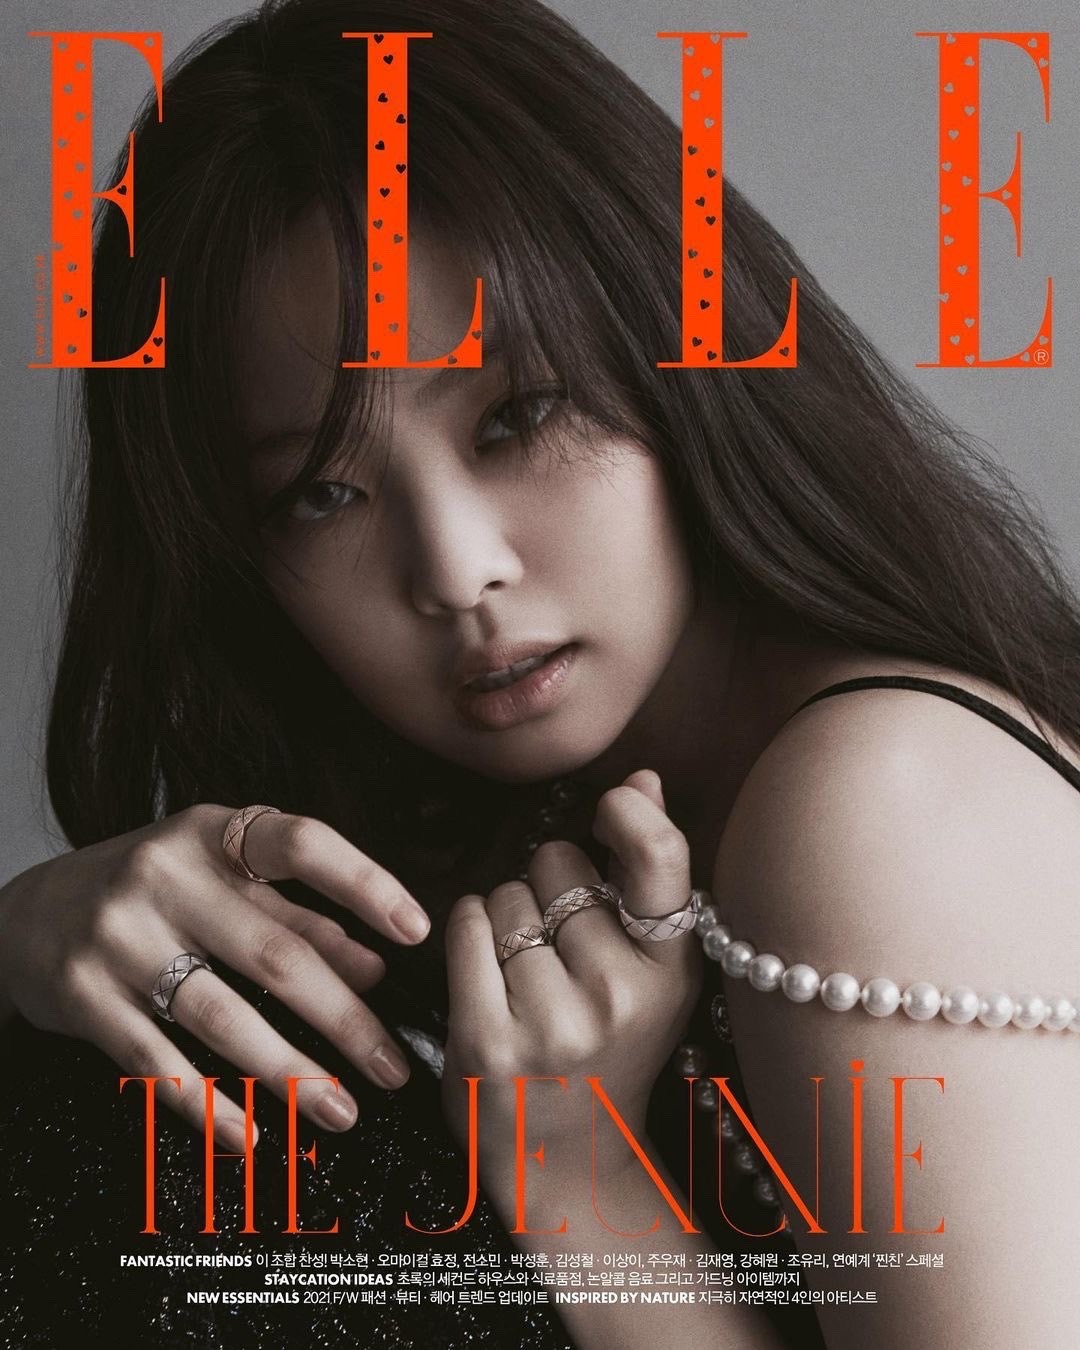 Jennie Kim — CHANEL “THE JENNIE” for the cover of ELLE KOREA